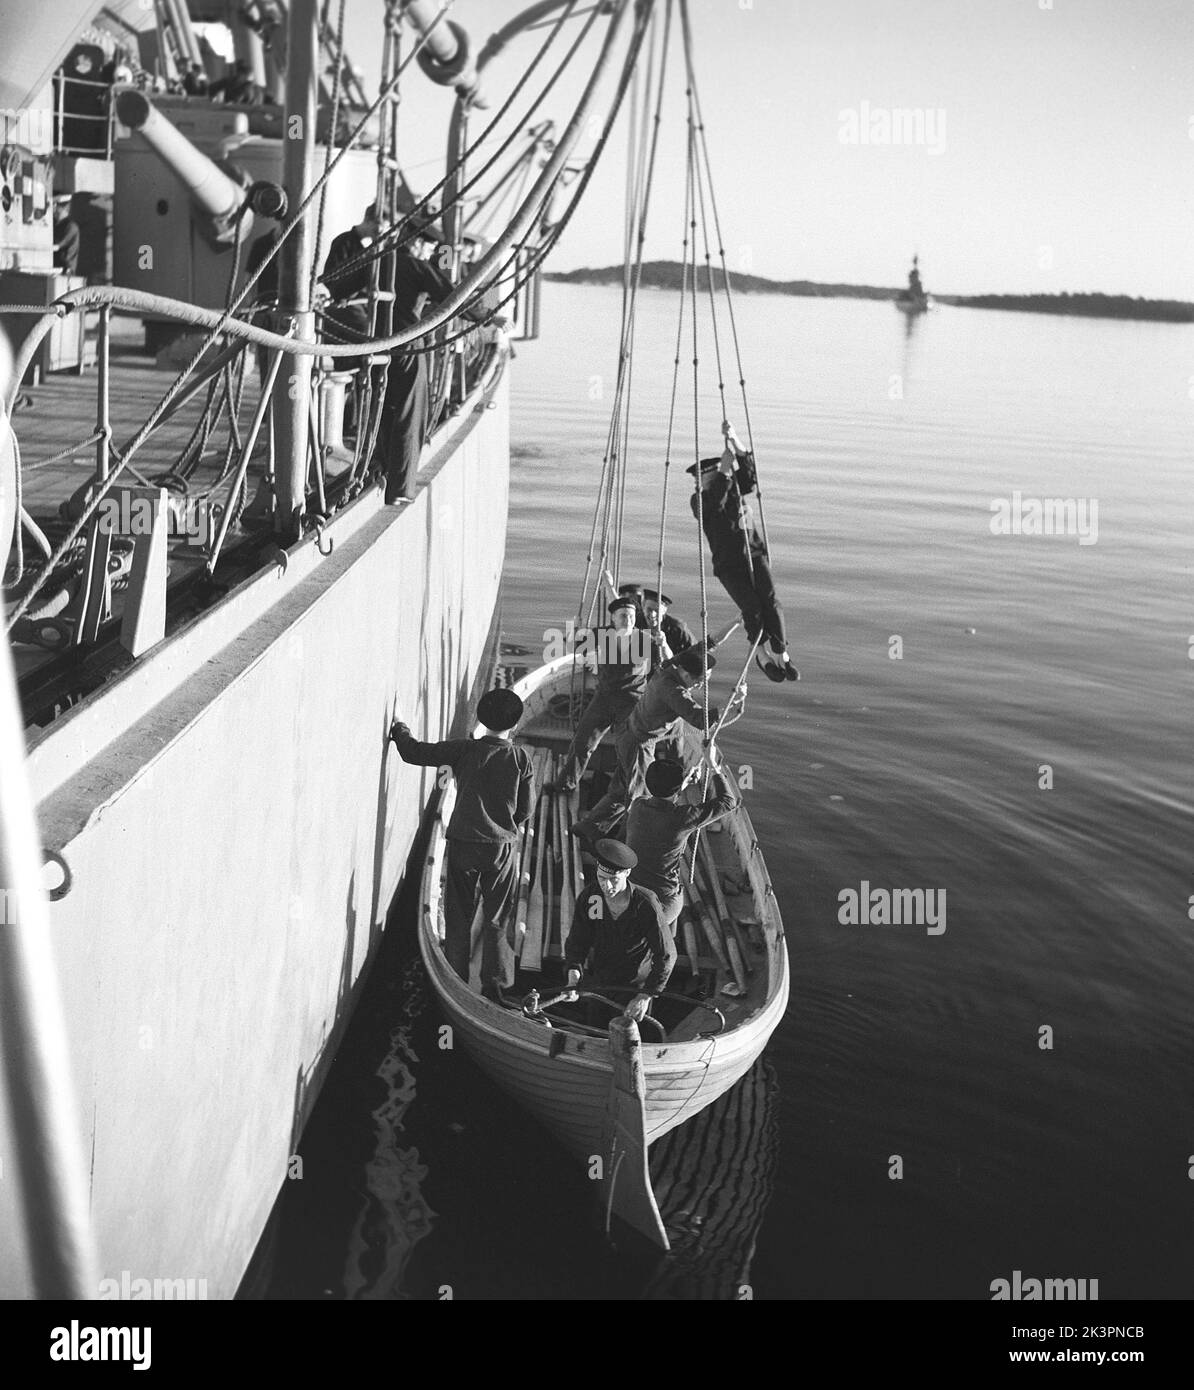 During World war II. The war ship Sverige during navy exercises at sea. The life boat is being fitted and has been lowered down in the water. Sweden june 1940. Kristoffersson ref 141 Stock Photo